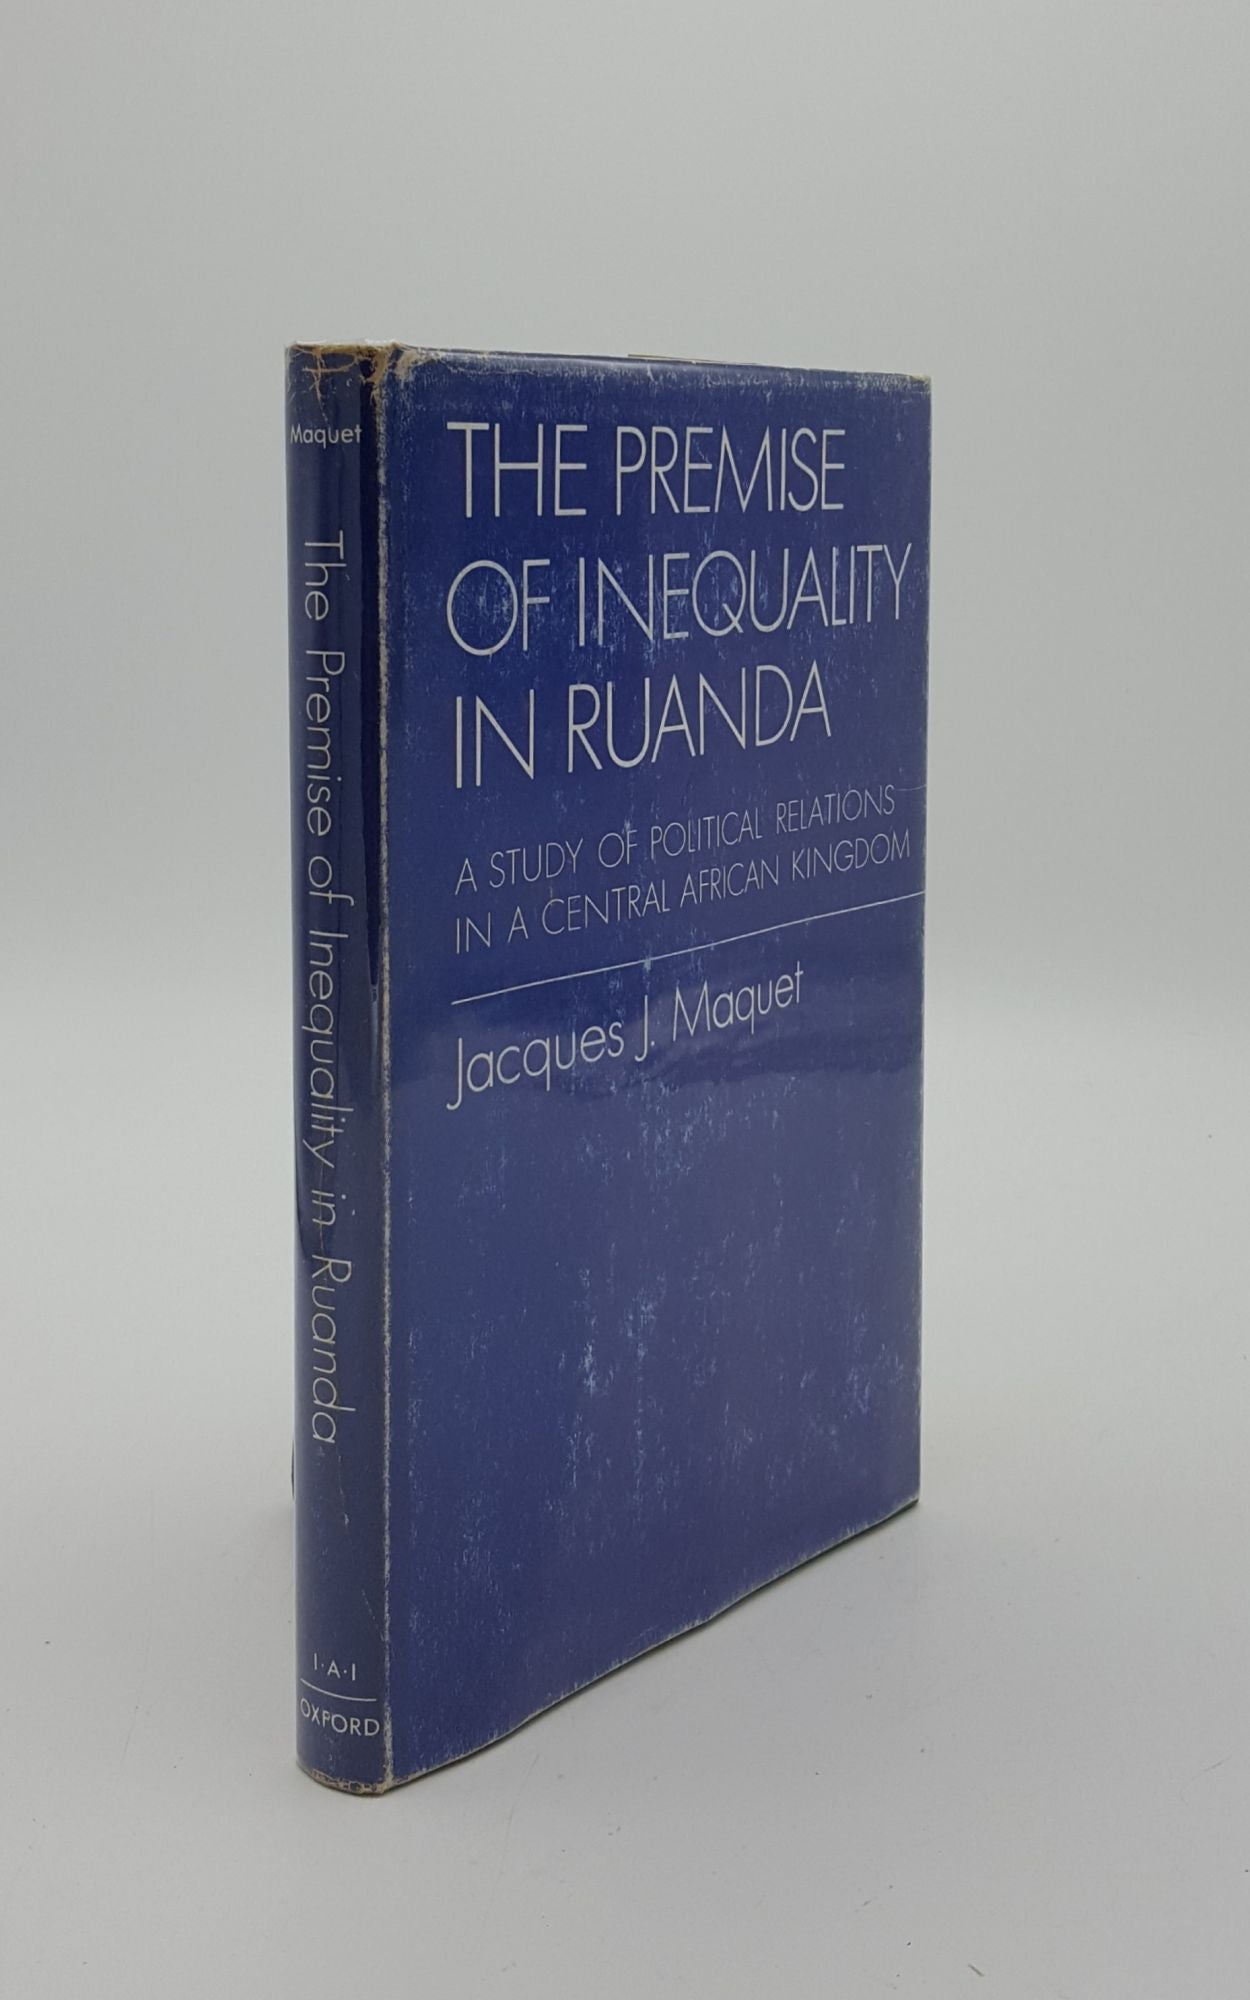 MAQUET Jacques J. - The Premise of Inequality in Ruanda a Study of Political Relations in a Central African Kingdom